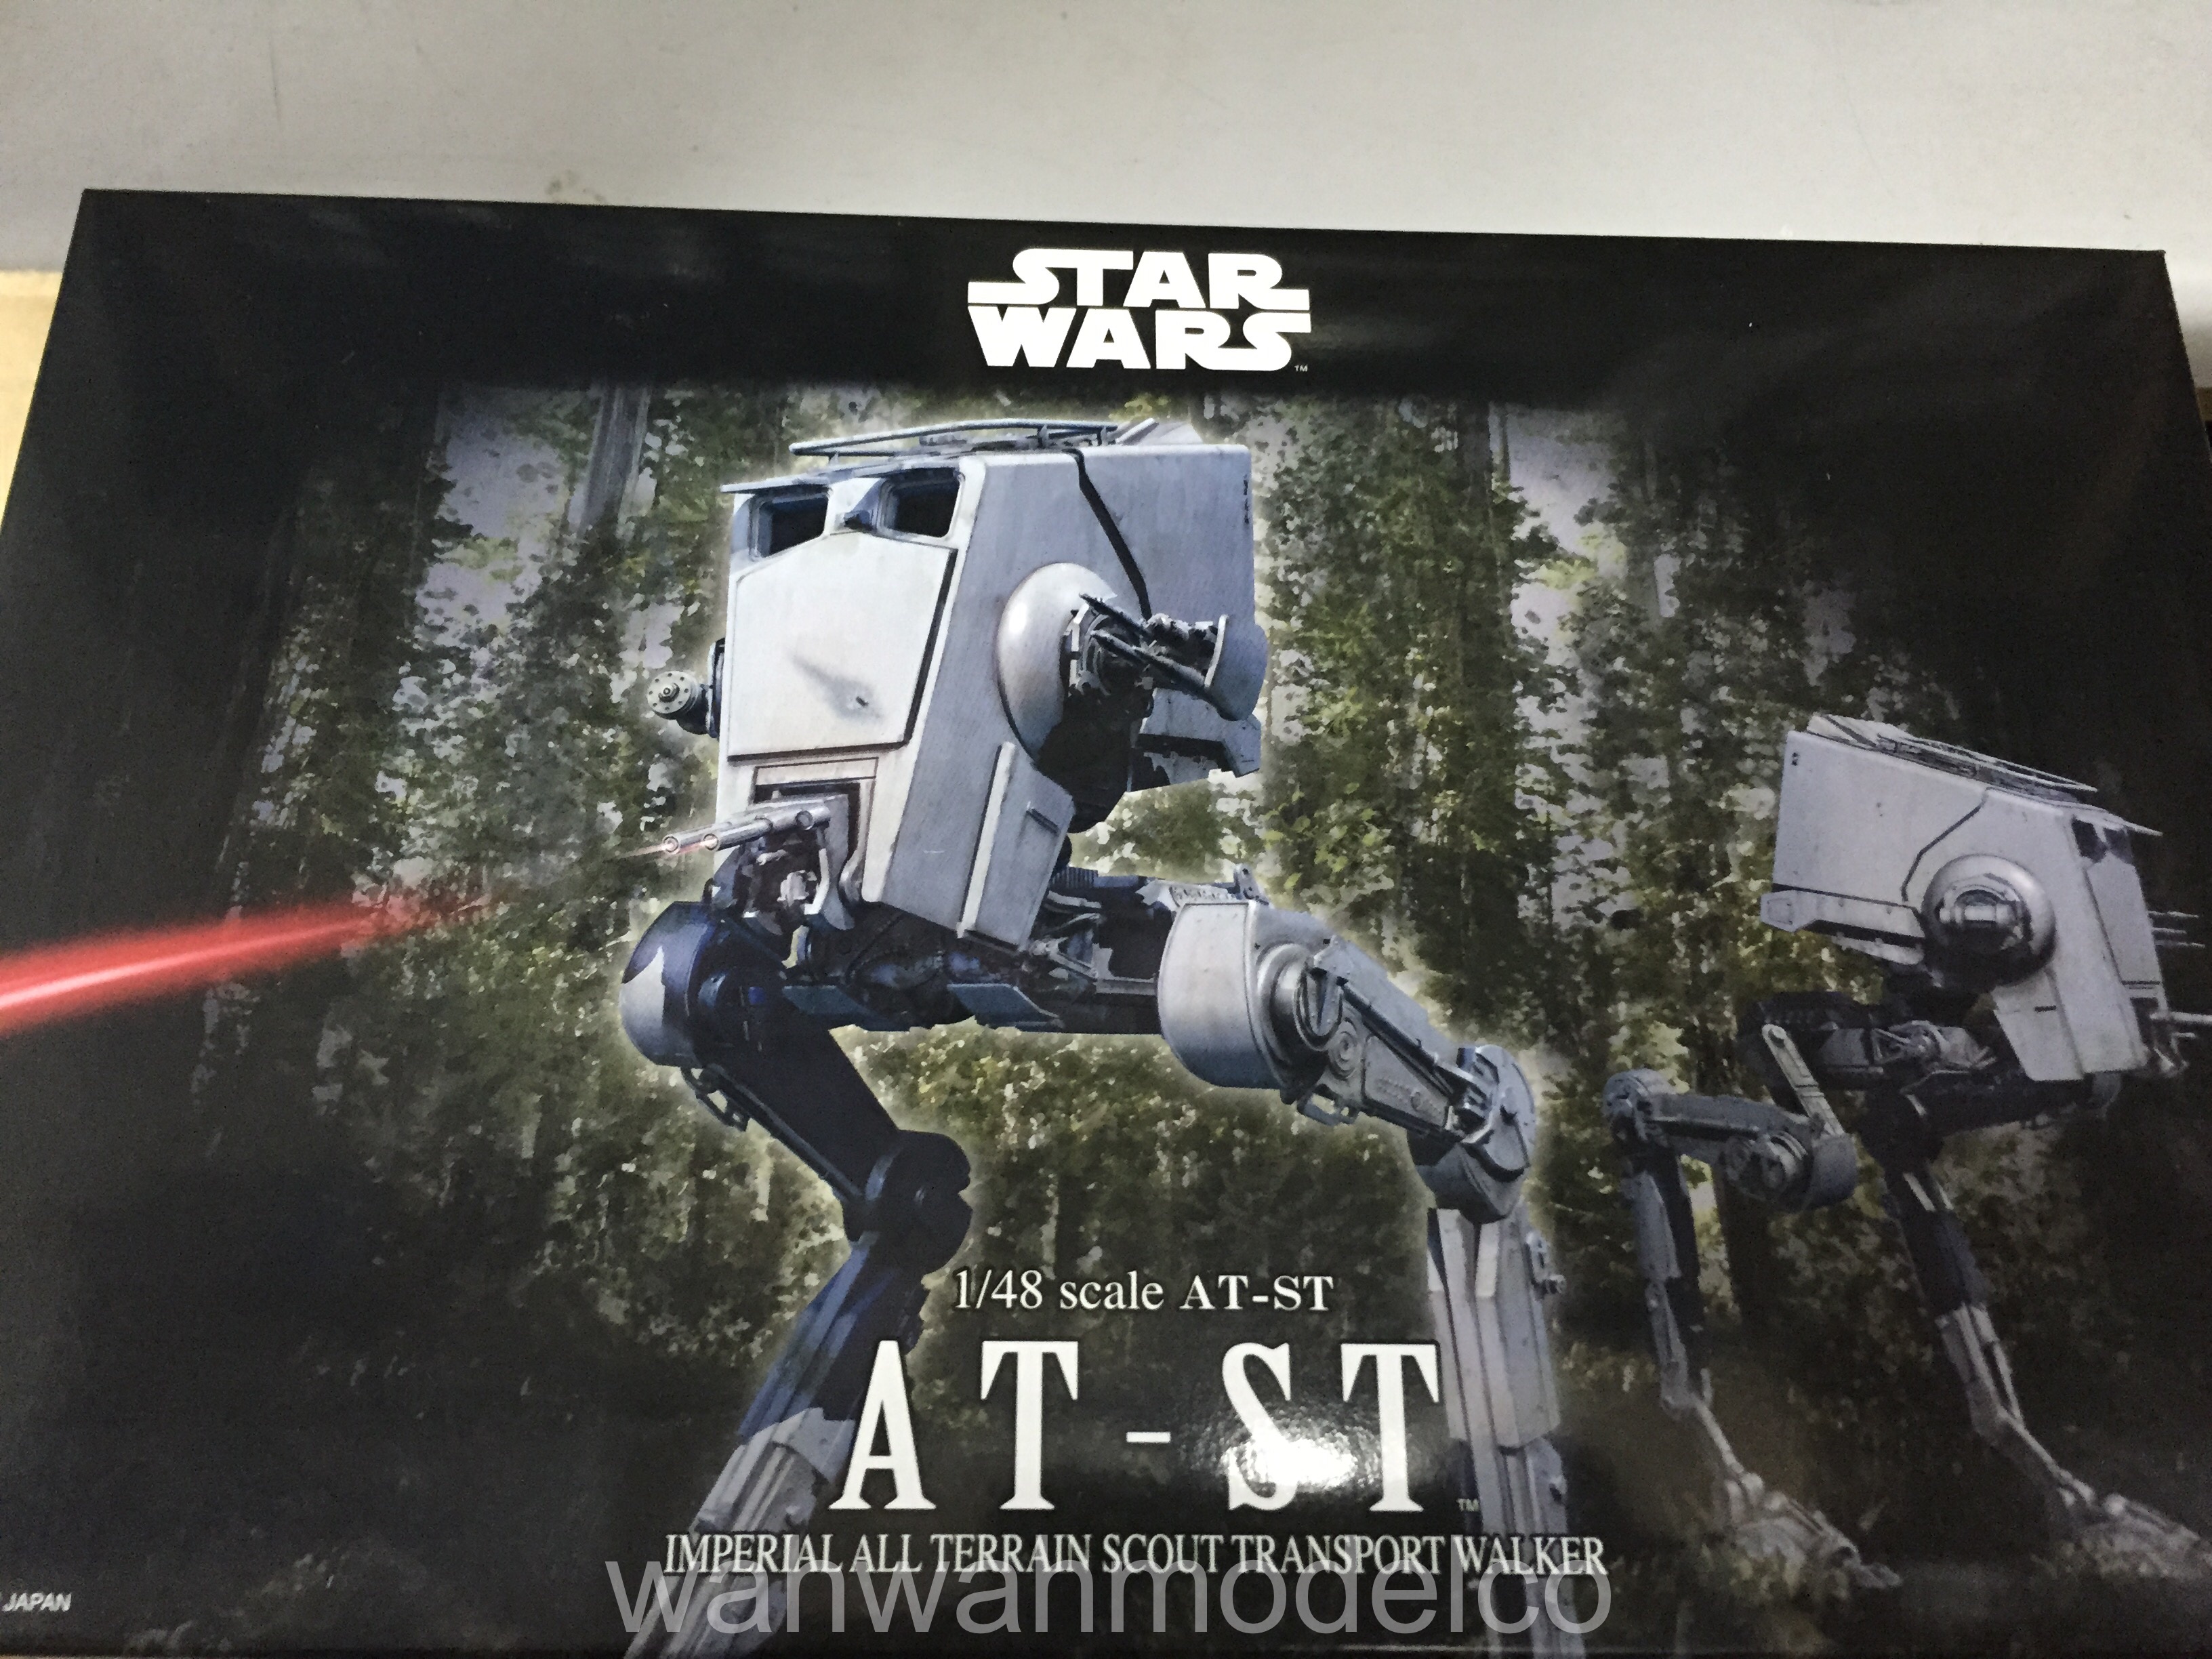 Bandai 1/48 Star Wars At-st Imperial All Terrain Scout Walker 0194869 for sale online 